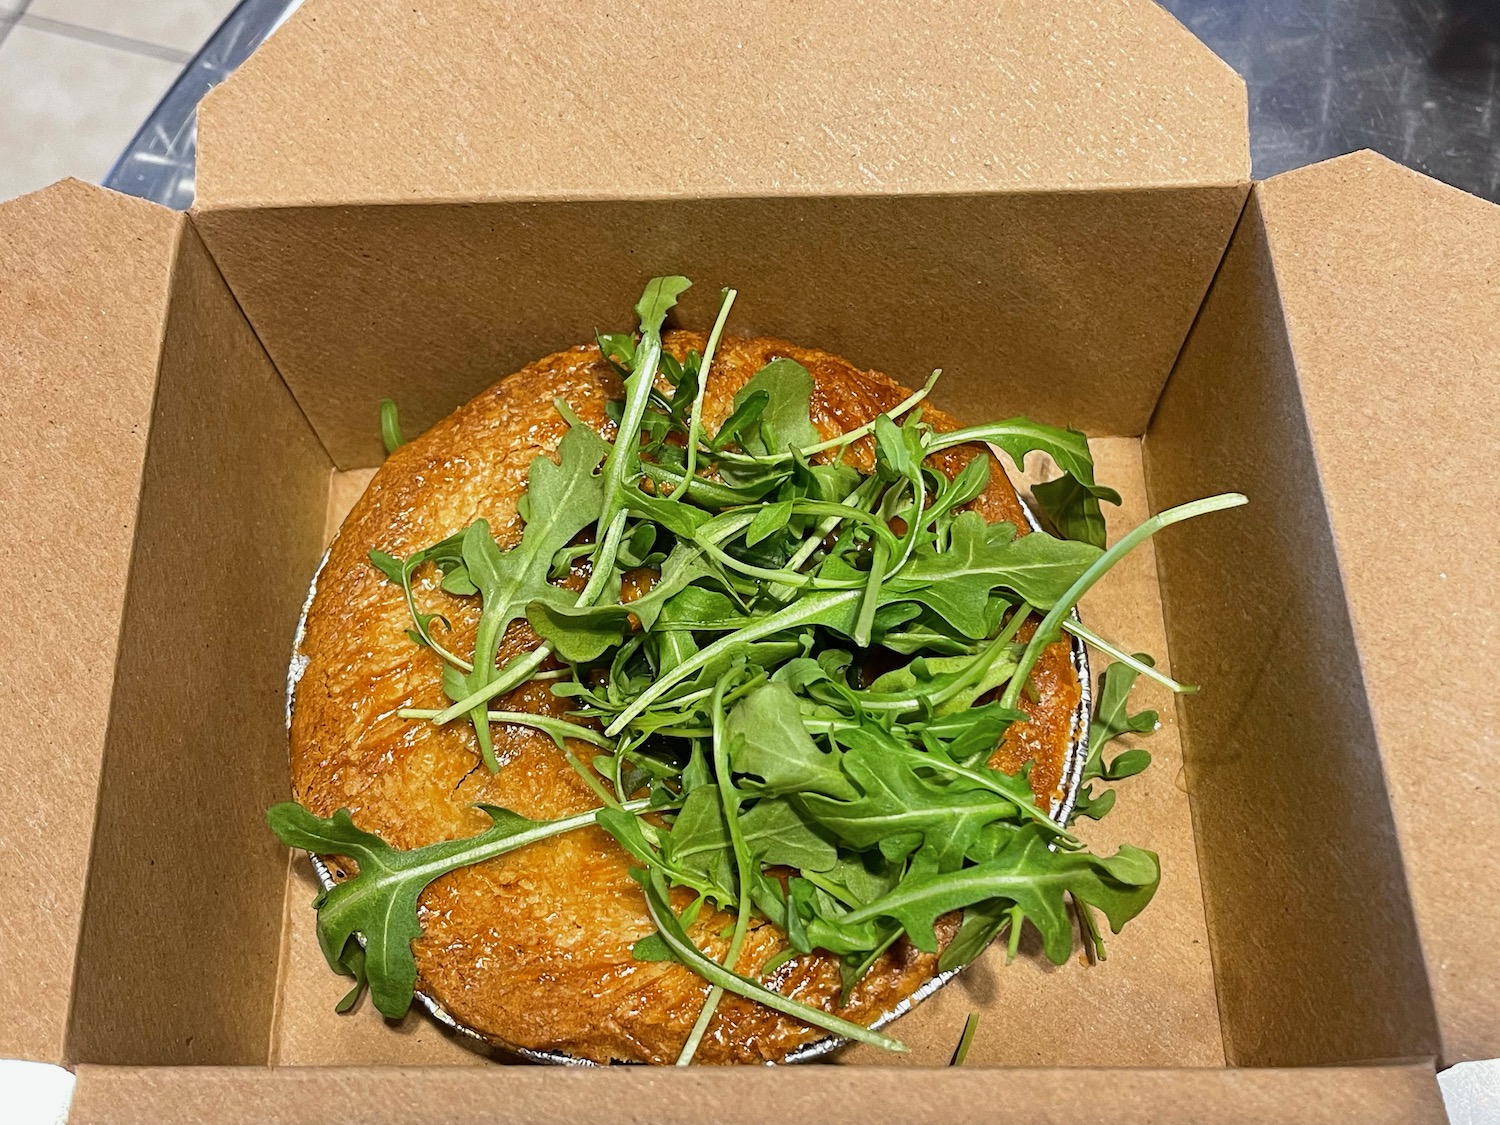 a pie with greens in a box